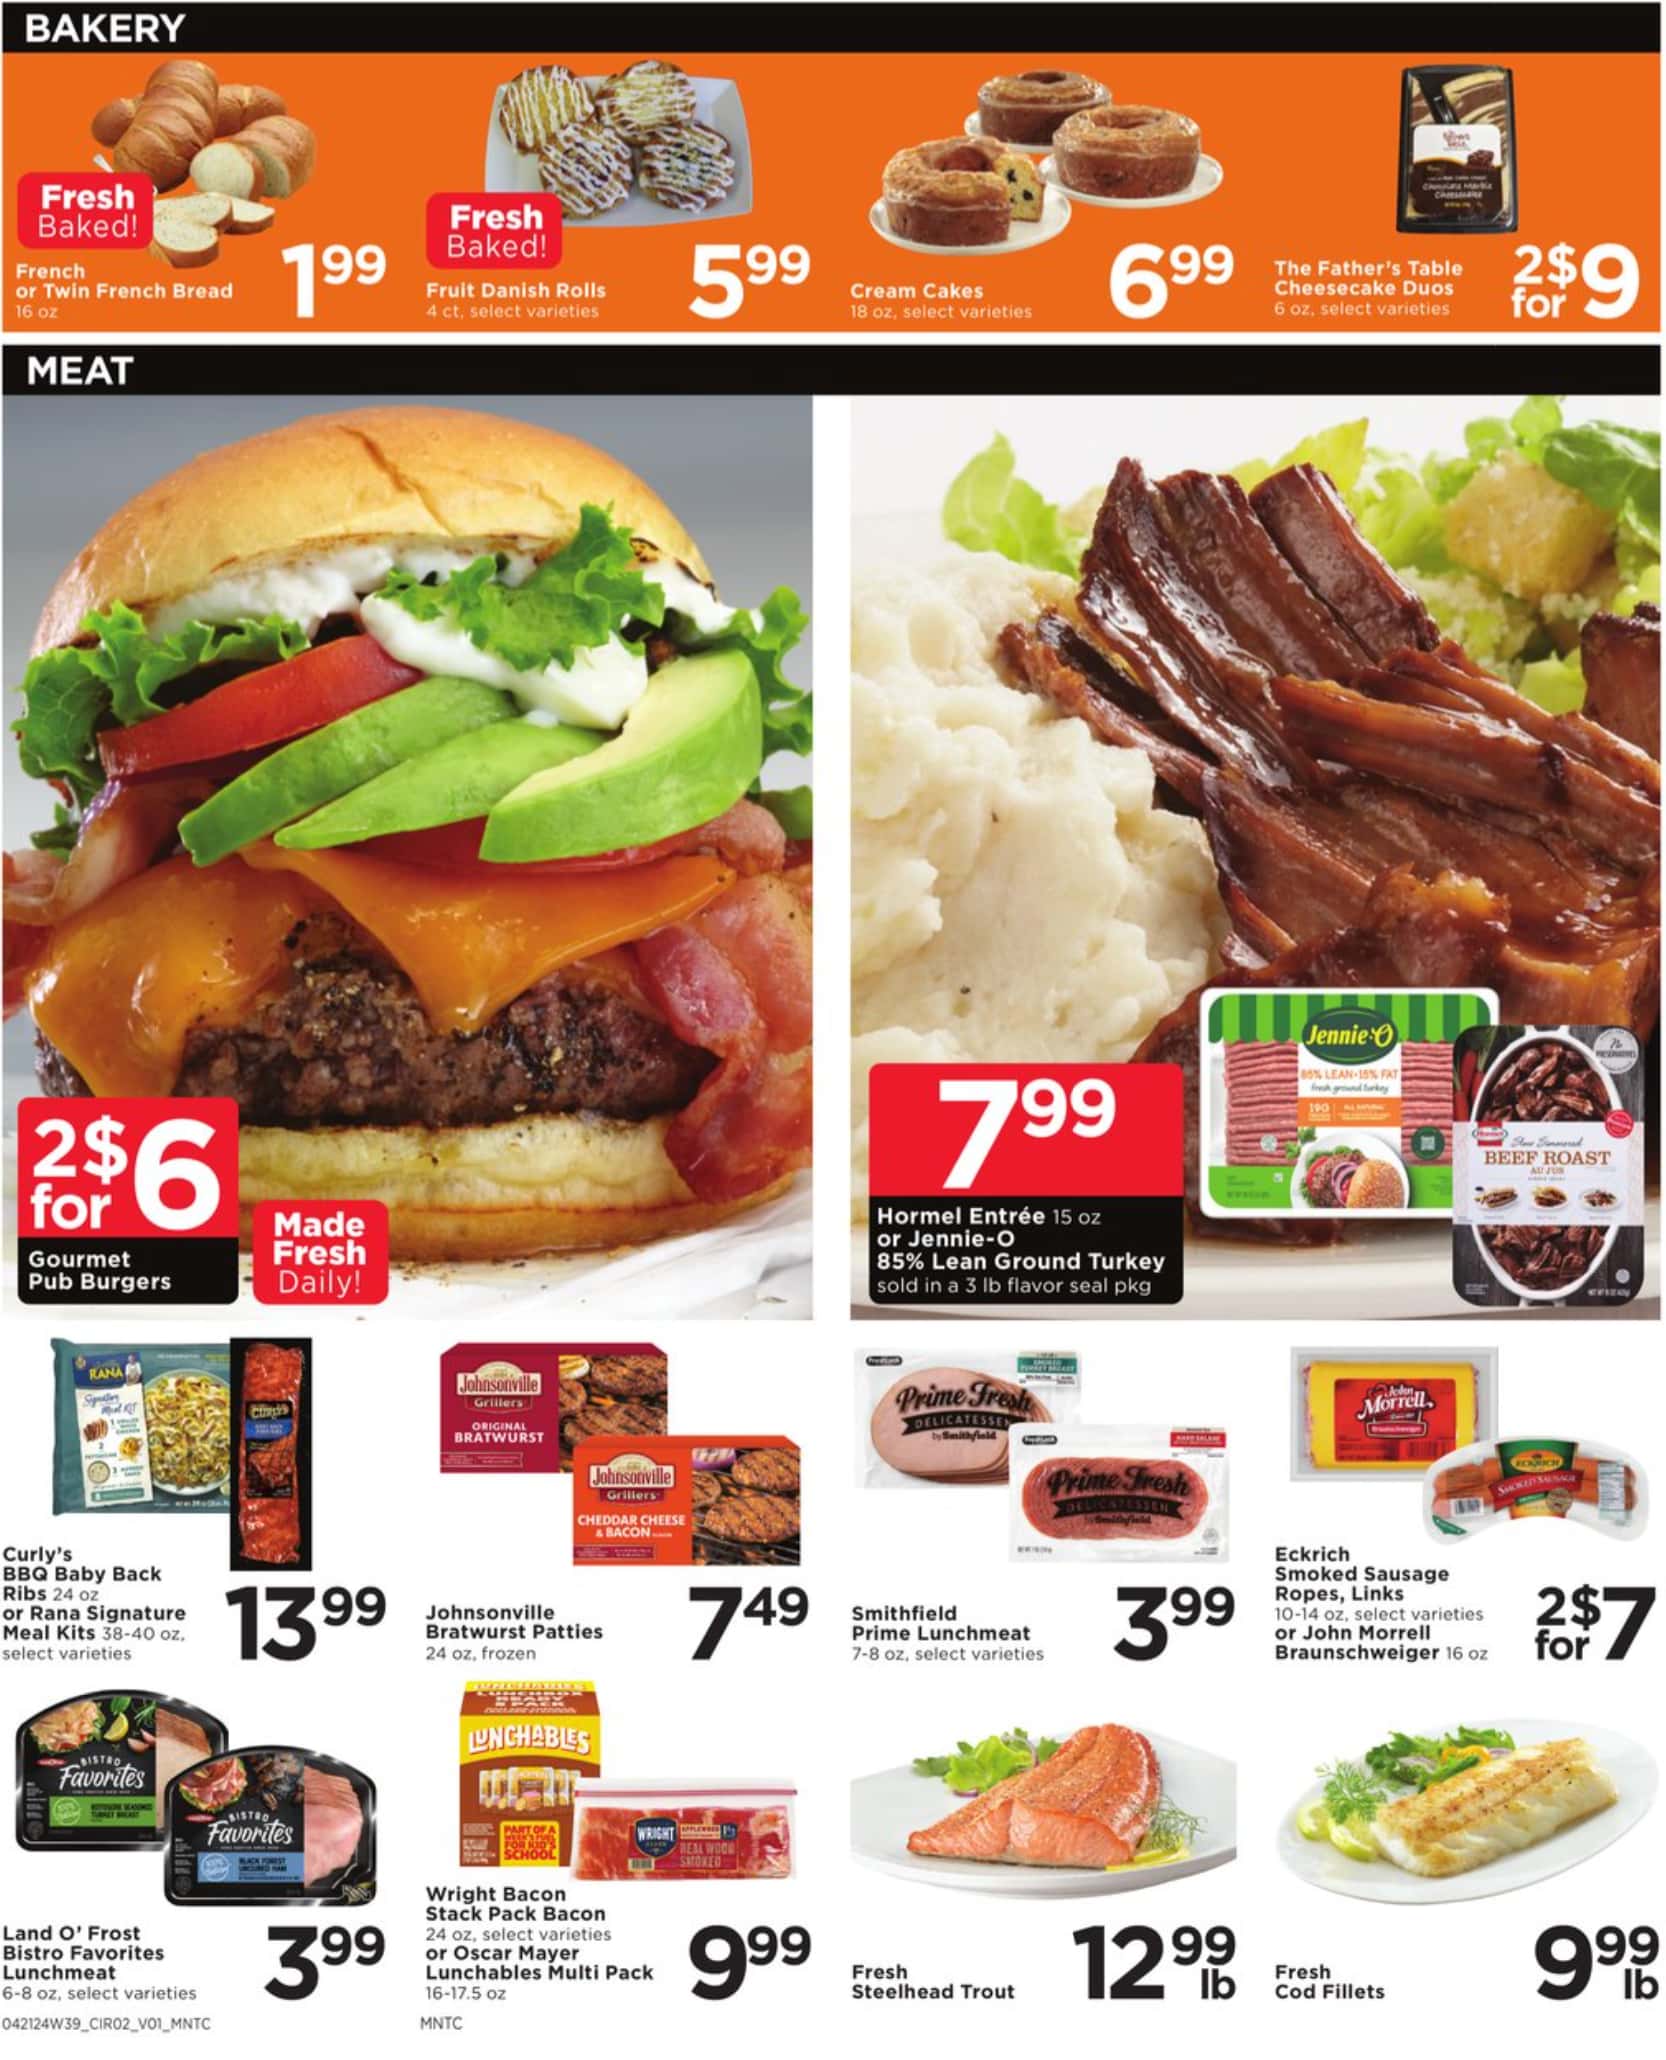 CubFoods_weekly_ad_042124_04